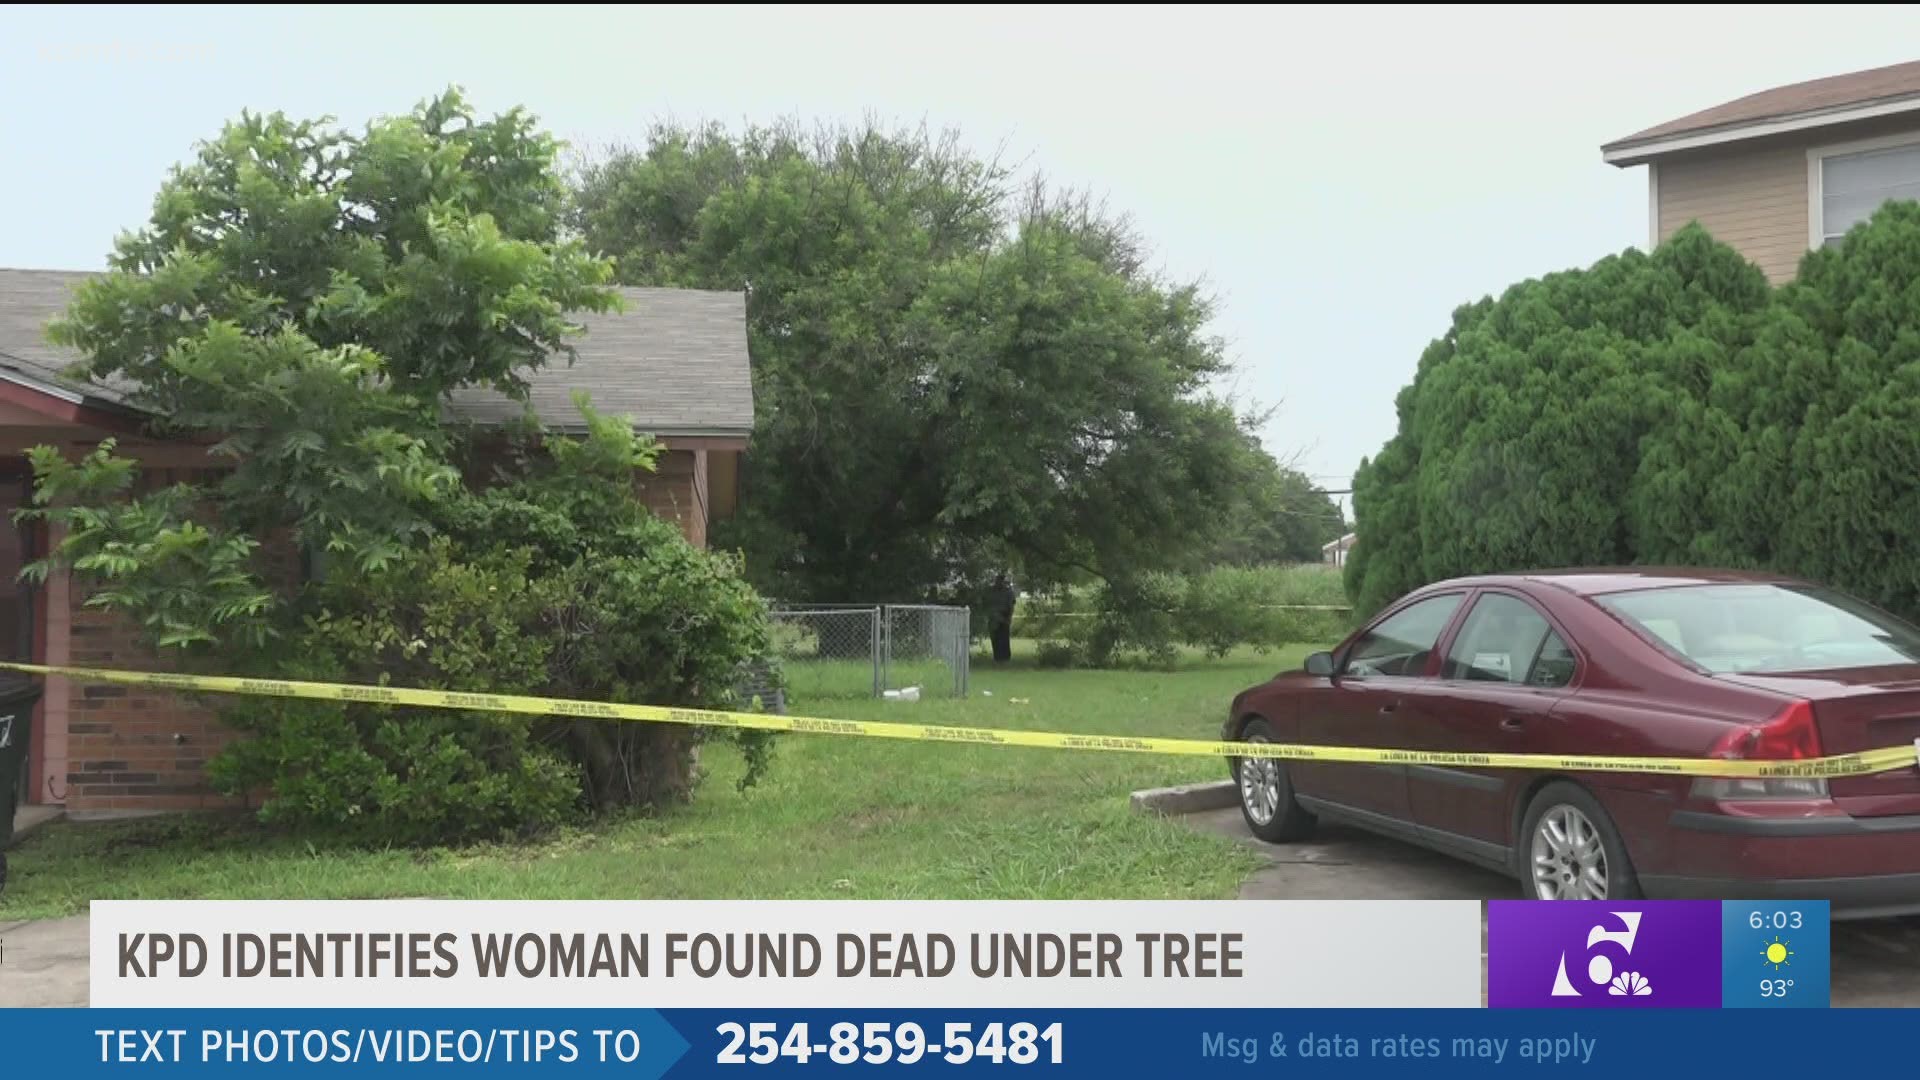 Officials identified the woman Wednesday as 54-year-old Ronda Kaye Mack.